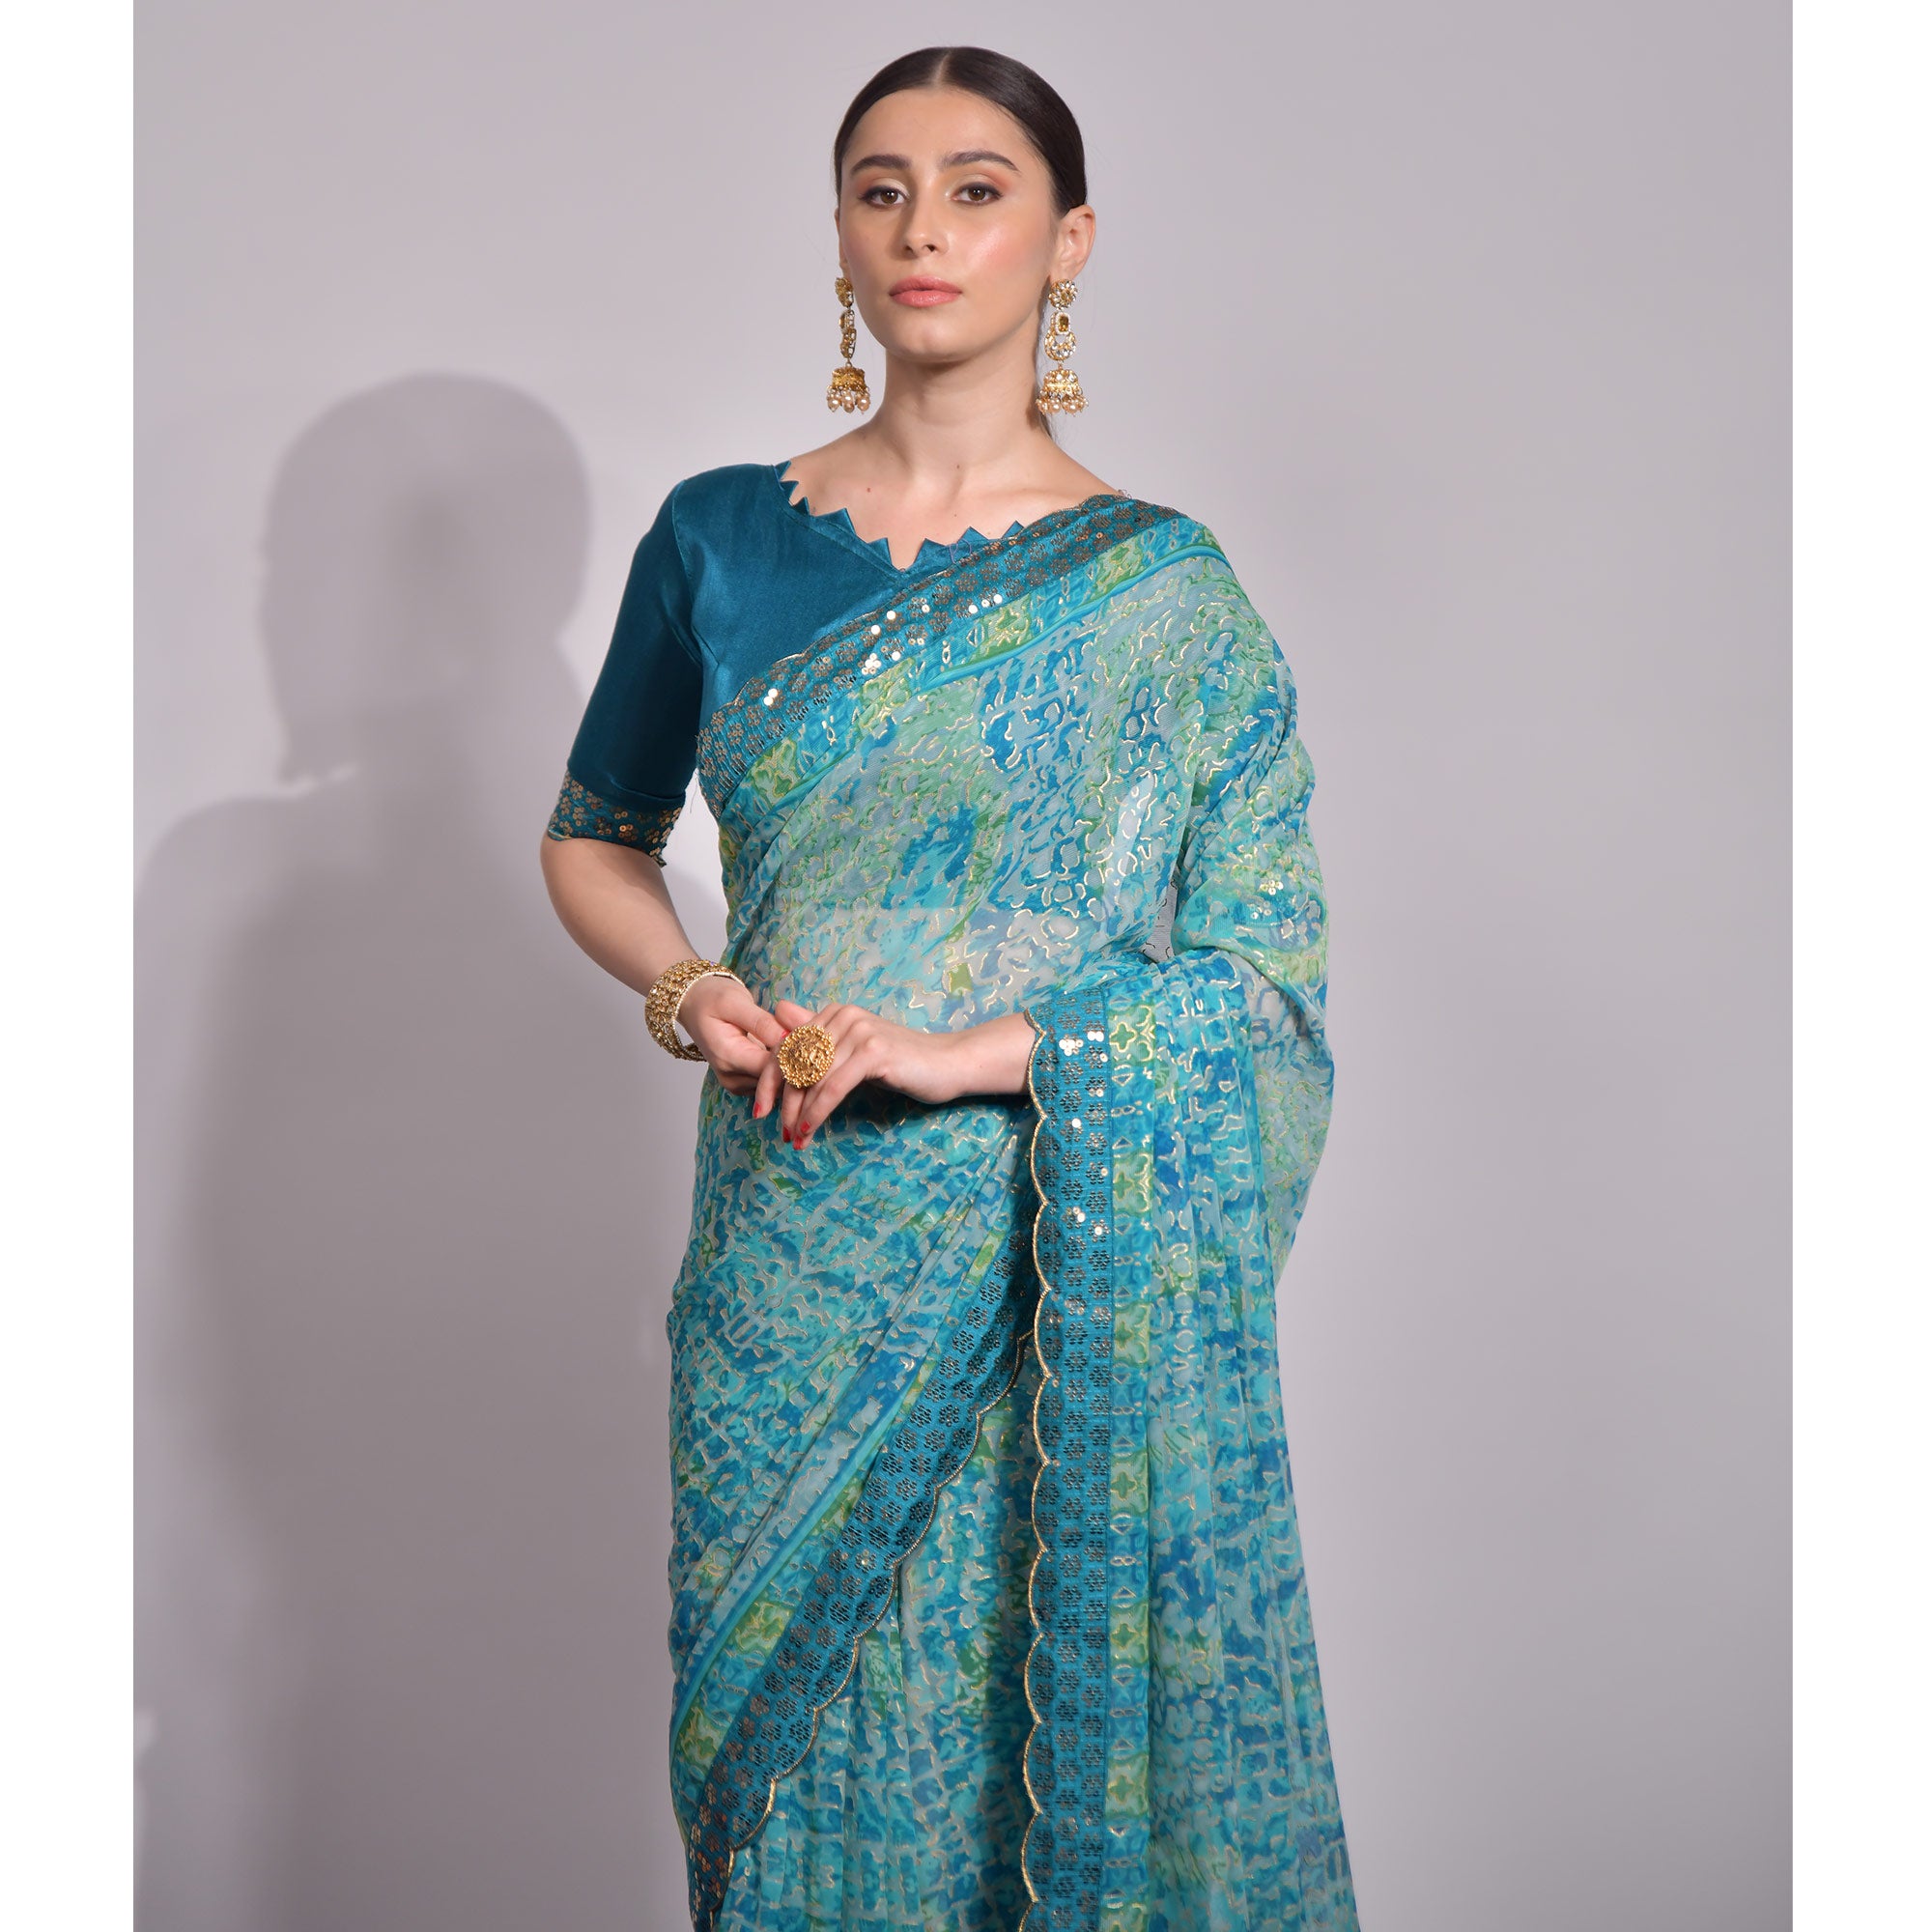 Blue Foil Printed Chiffon Saree With Embroidered Border